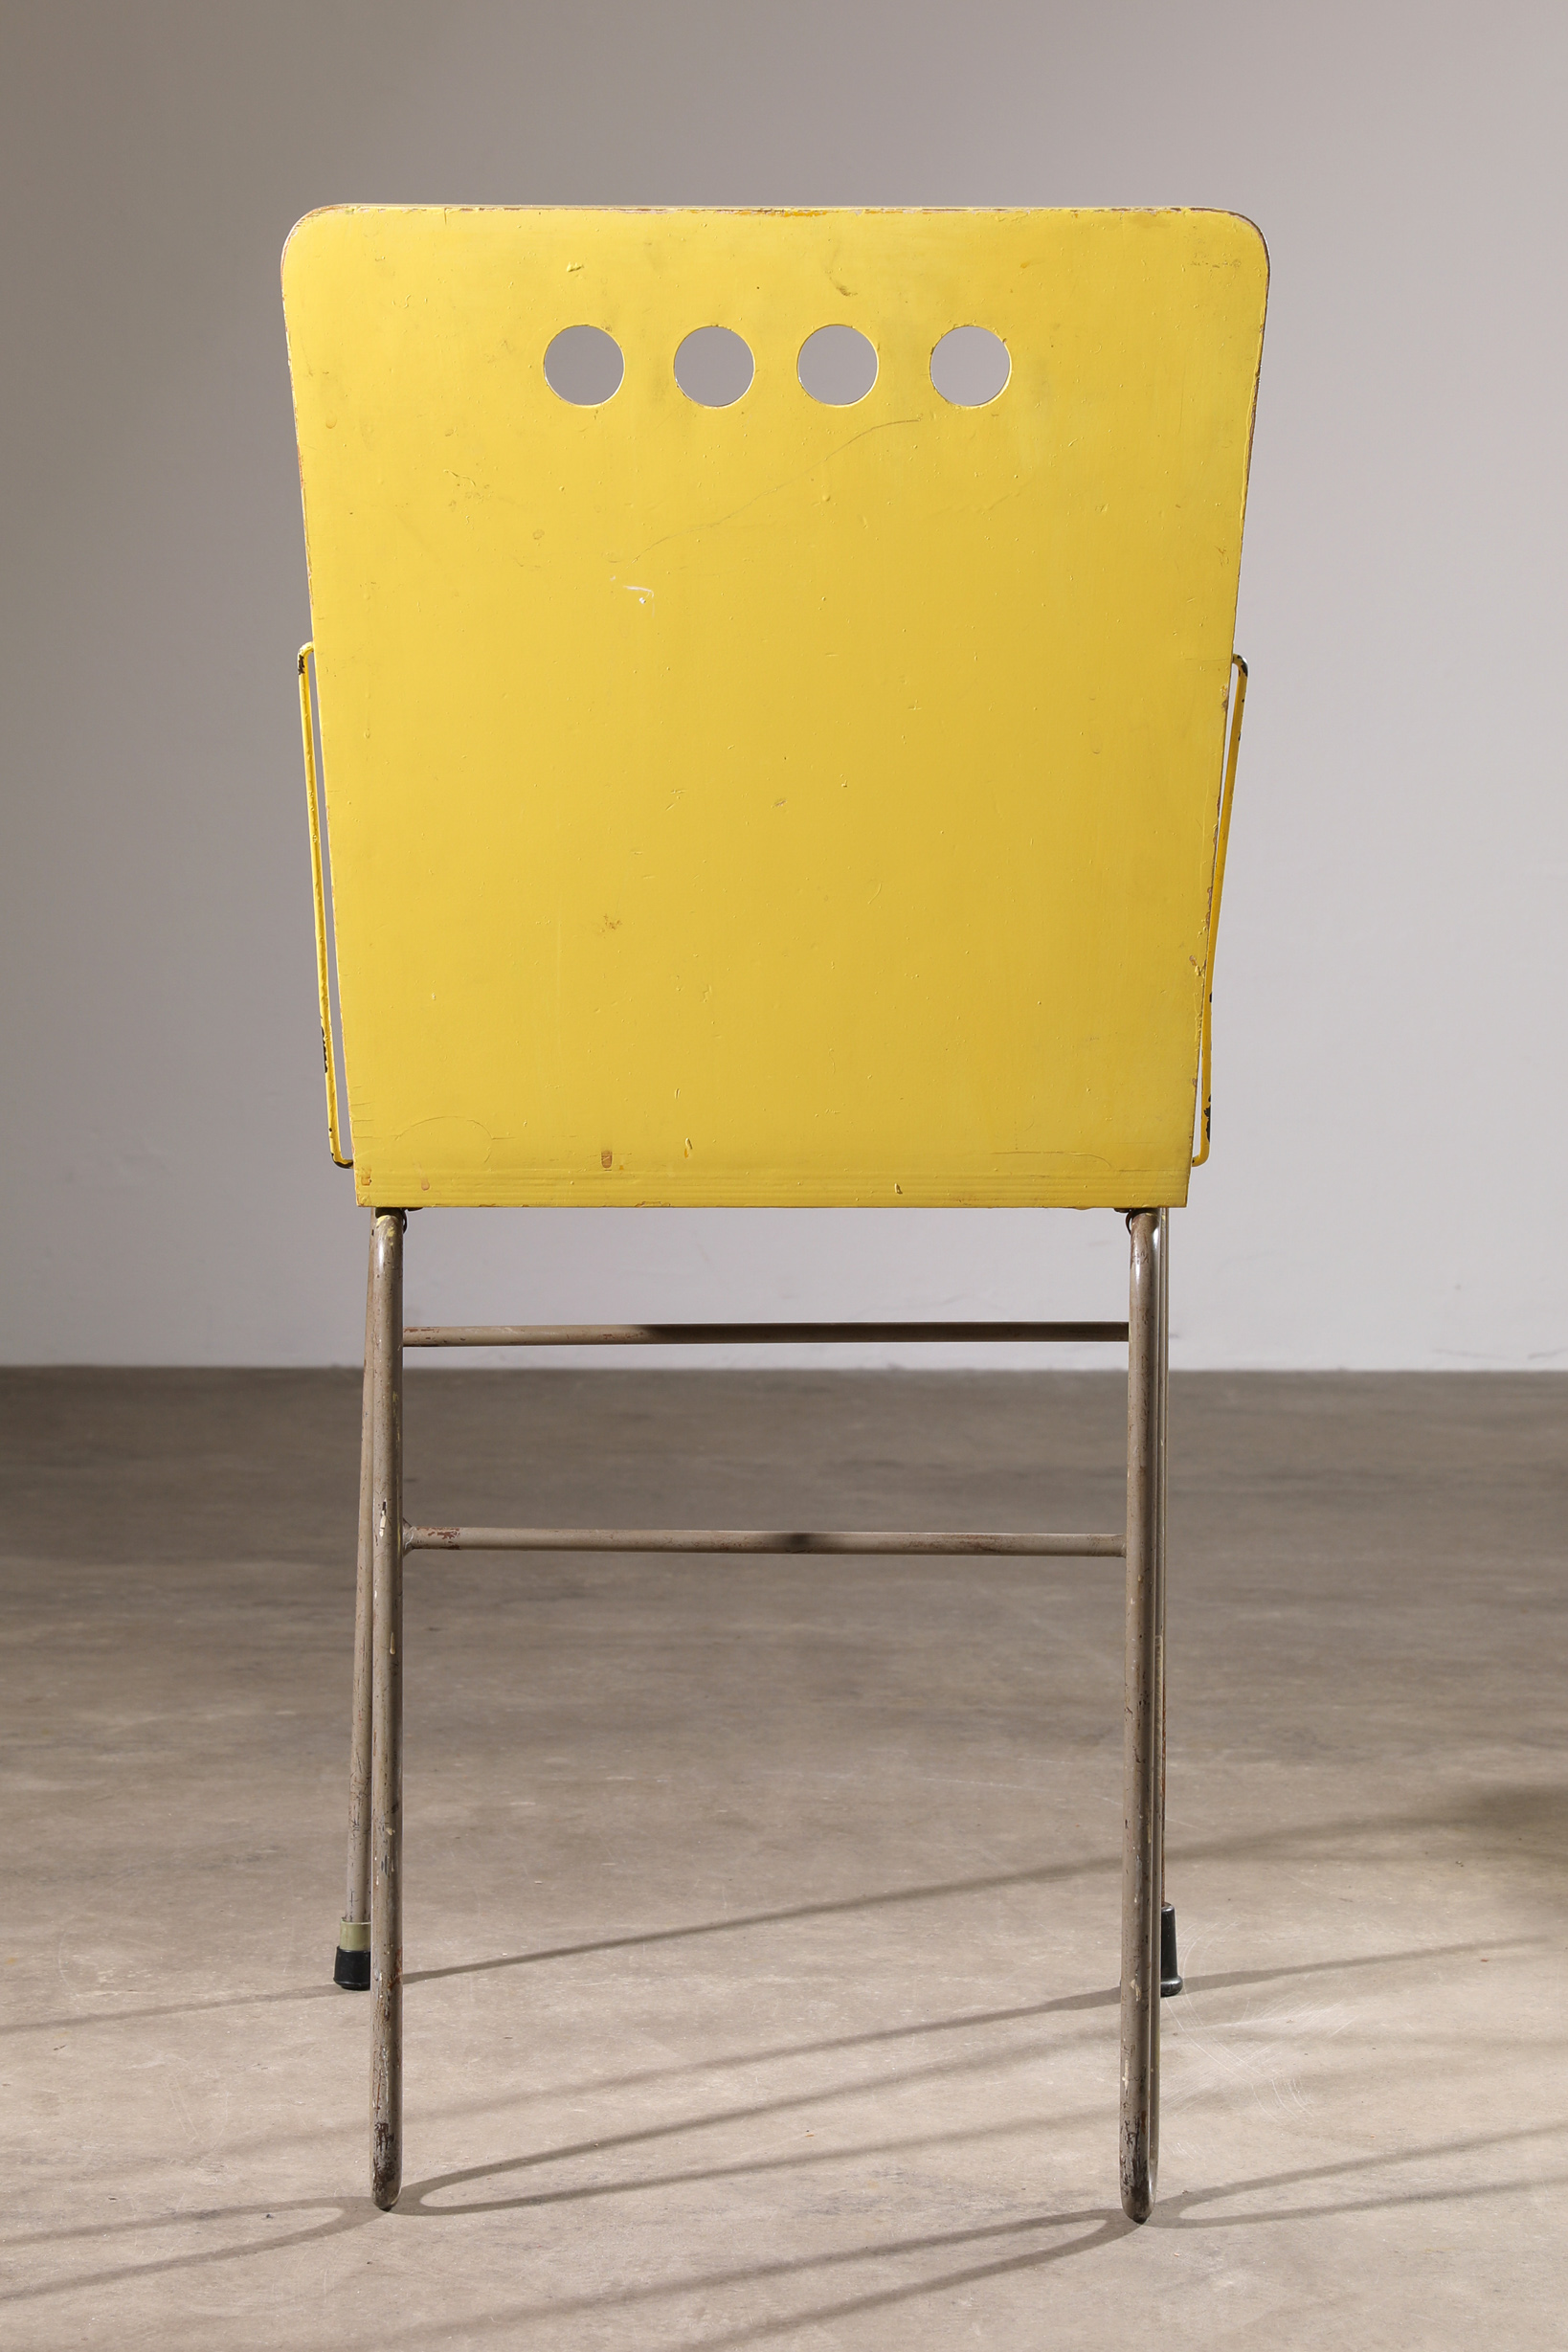 Gerrit Rietveld Jr., Chair from a self-produced small series - Image 6 of 7